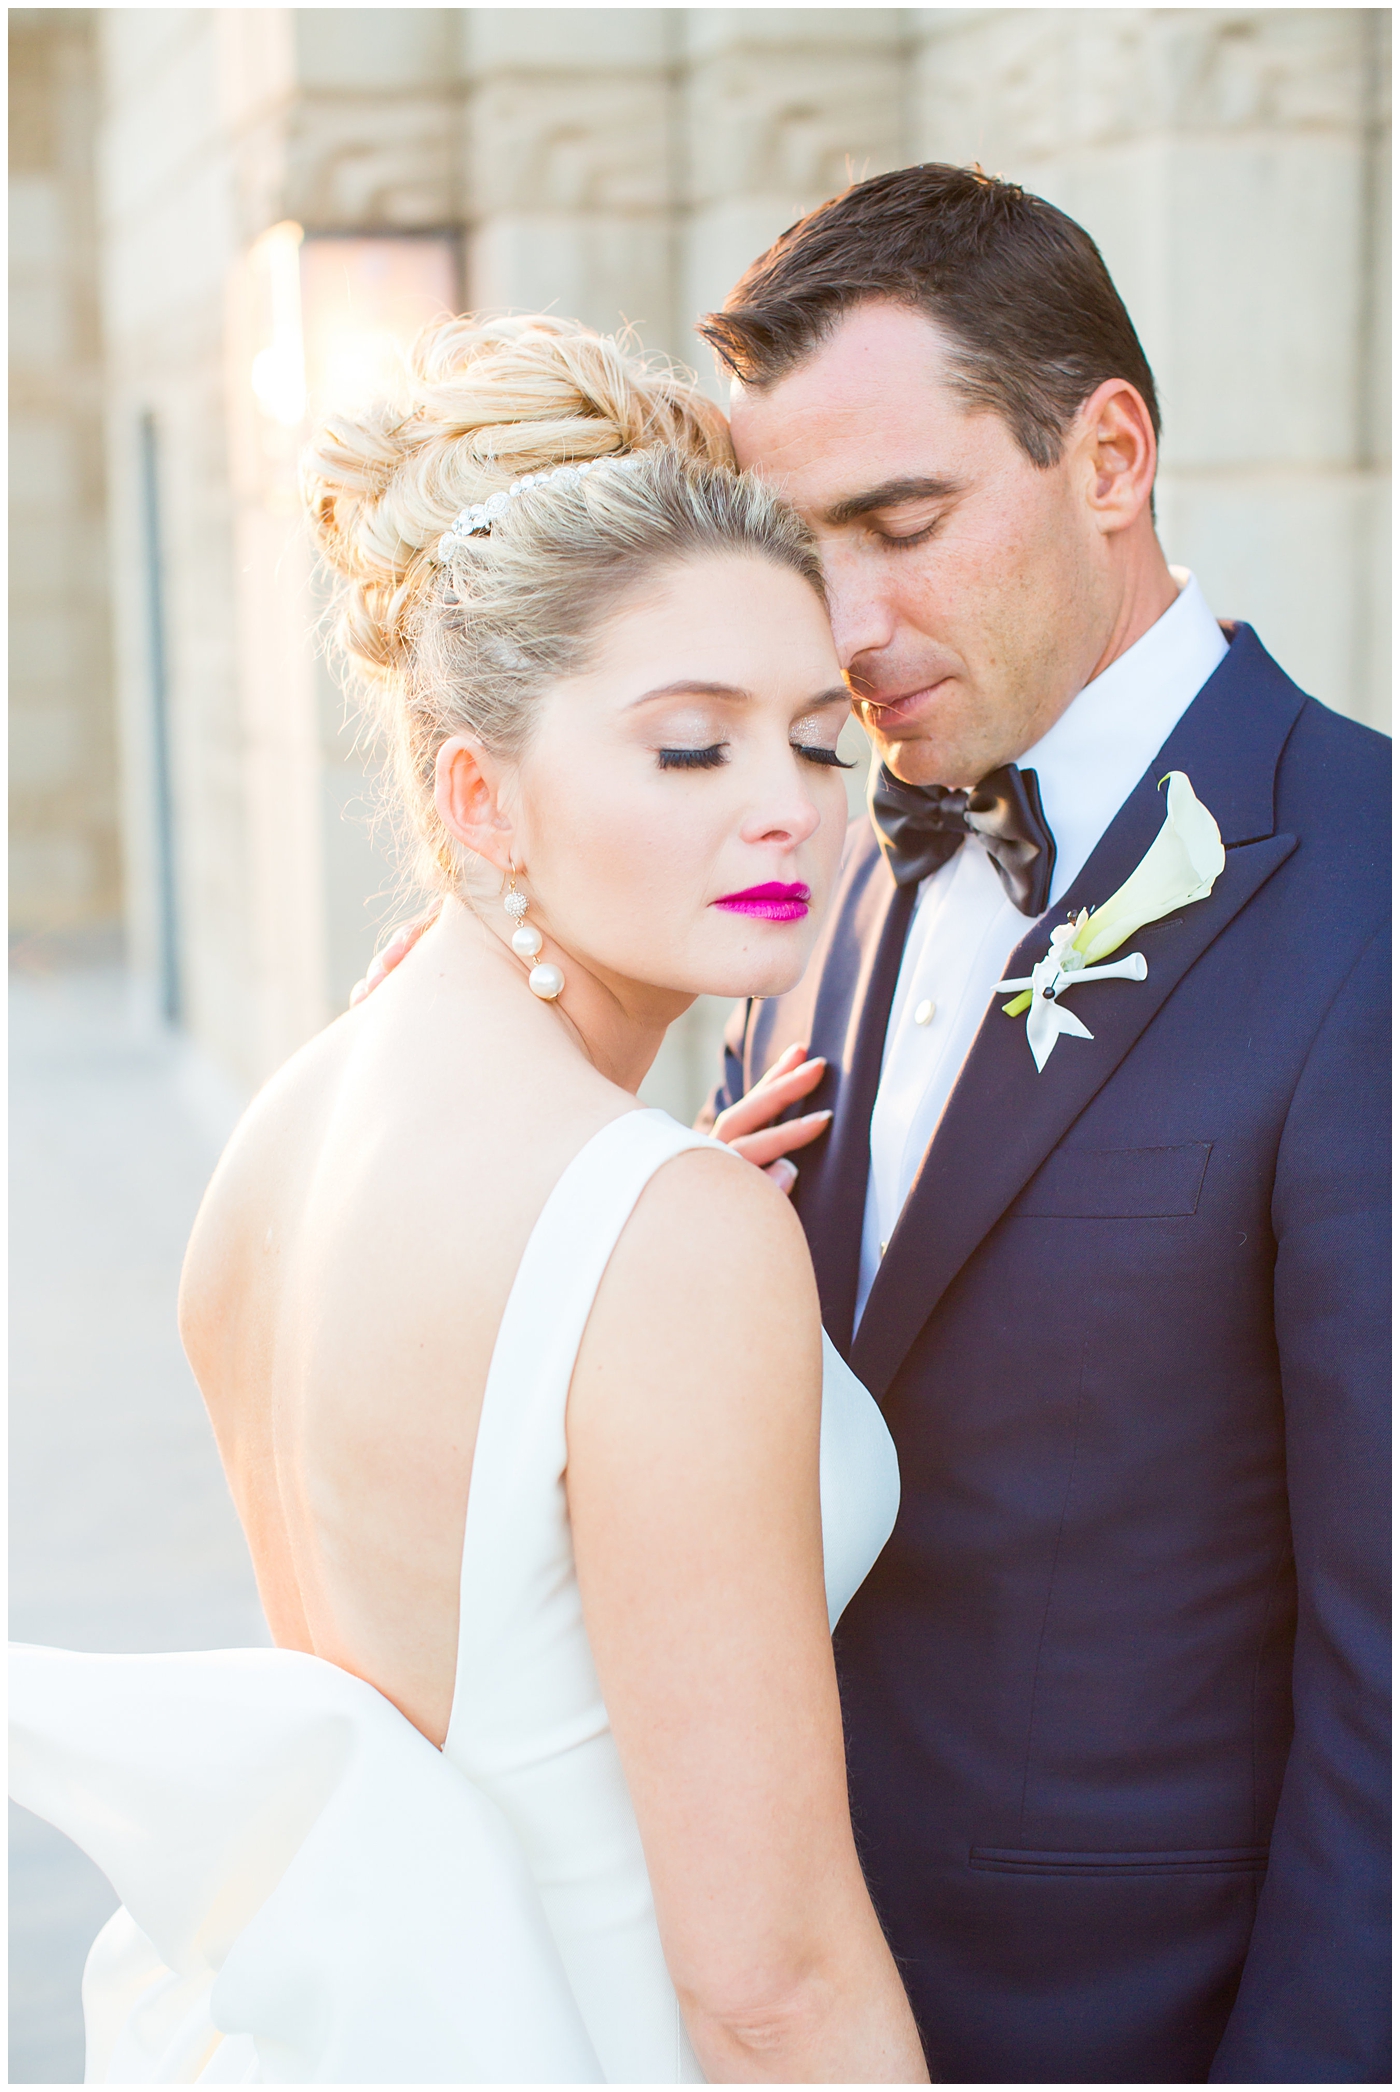 Bride in sareh nouri wedding dress with bow on the back and pink lip stick with all white flower bouquet with groom in navy neiman marcus and canali suit with bowtie with calla lilly boutonniere wedding day portrait